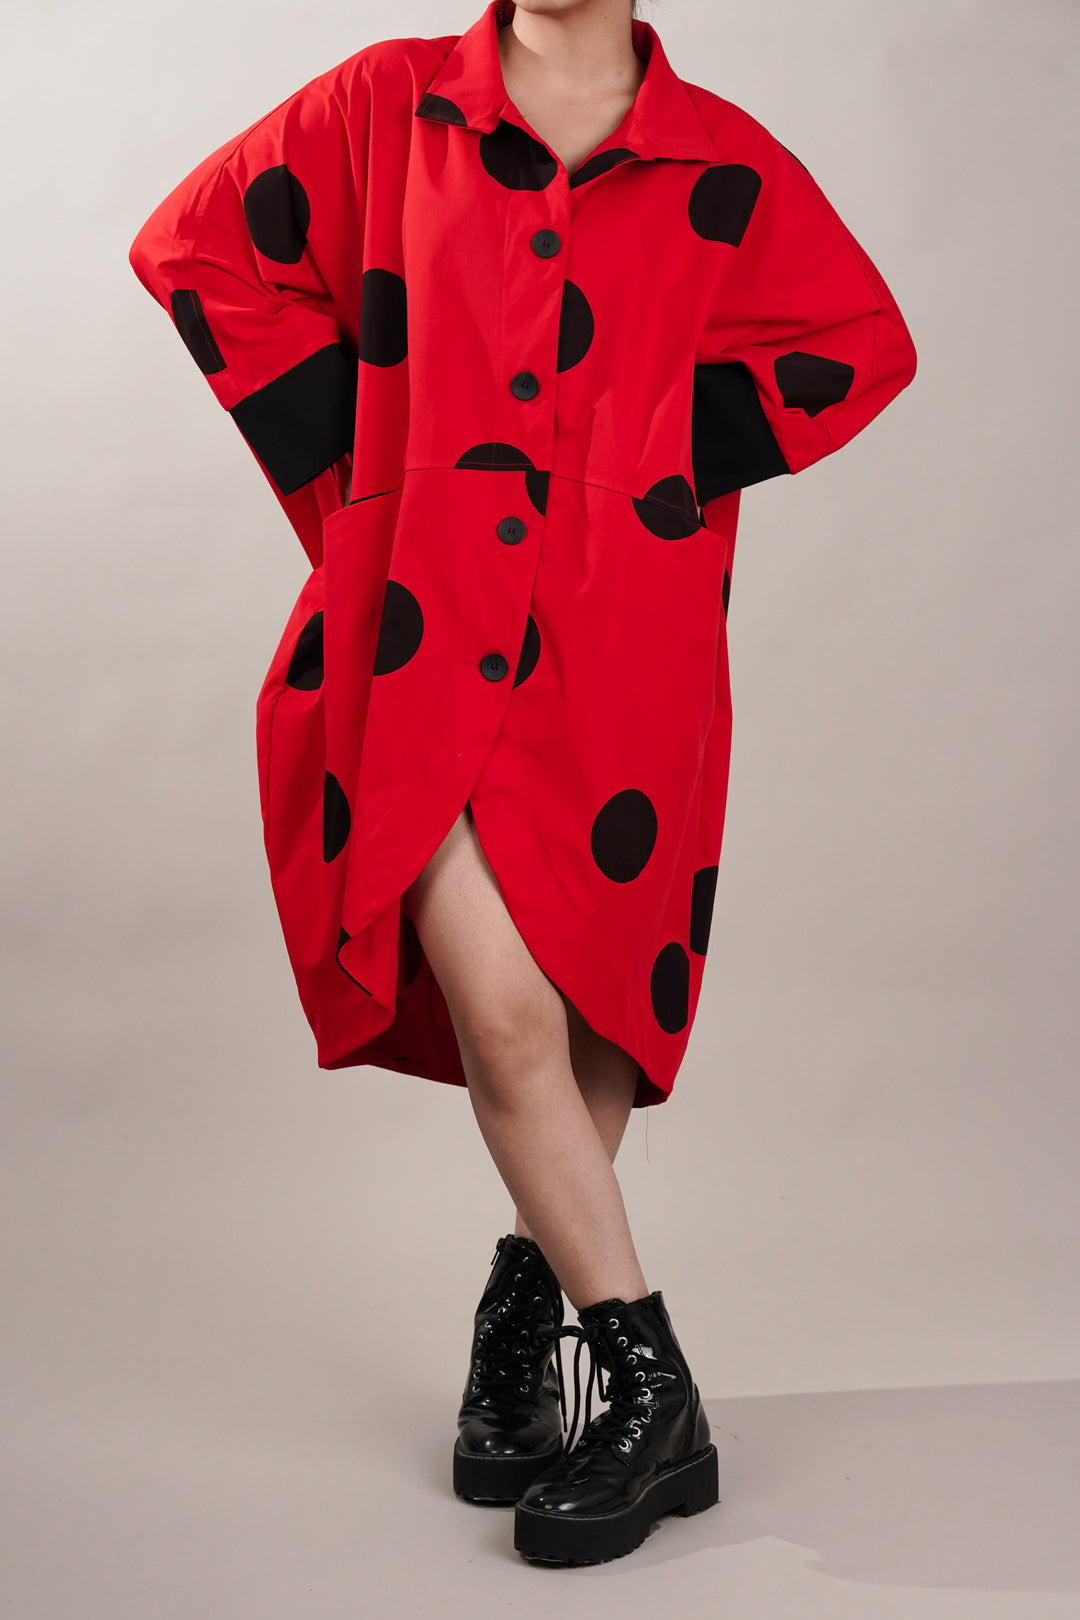 Stylish blood red oversized dress for women